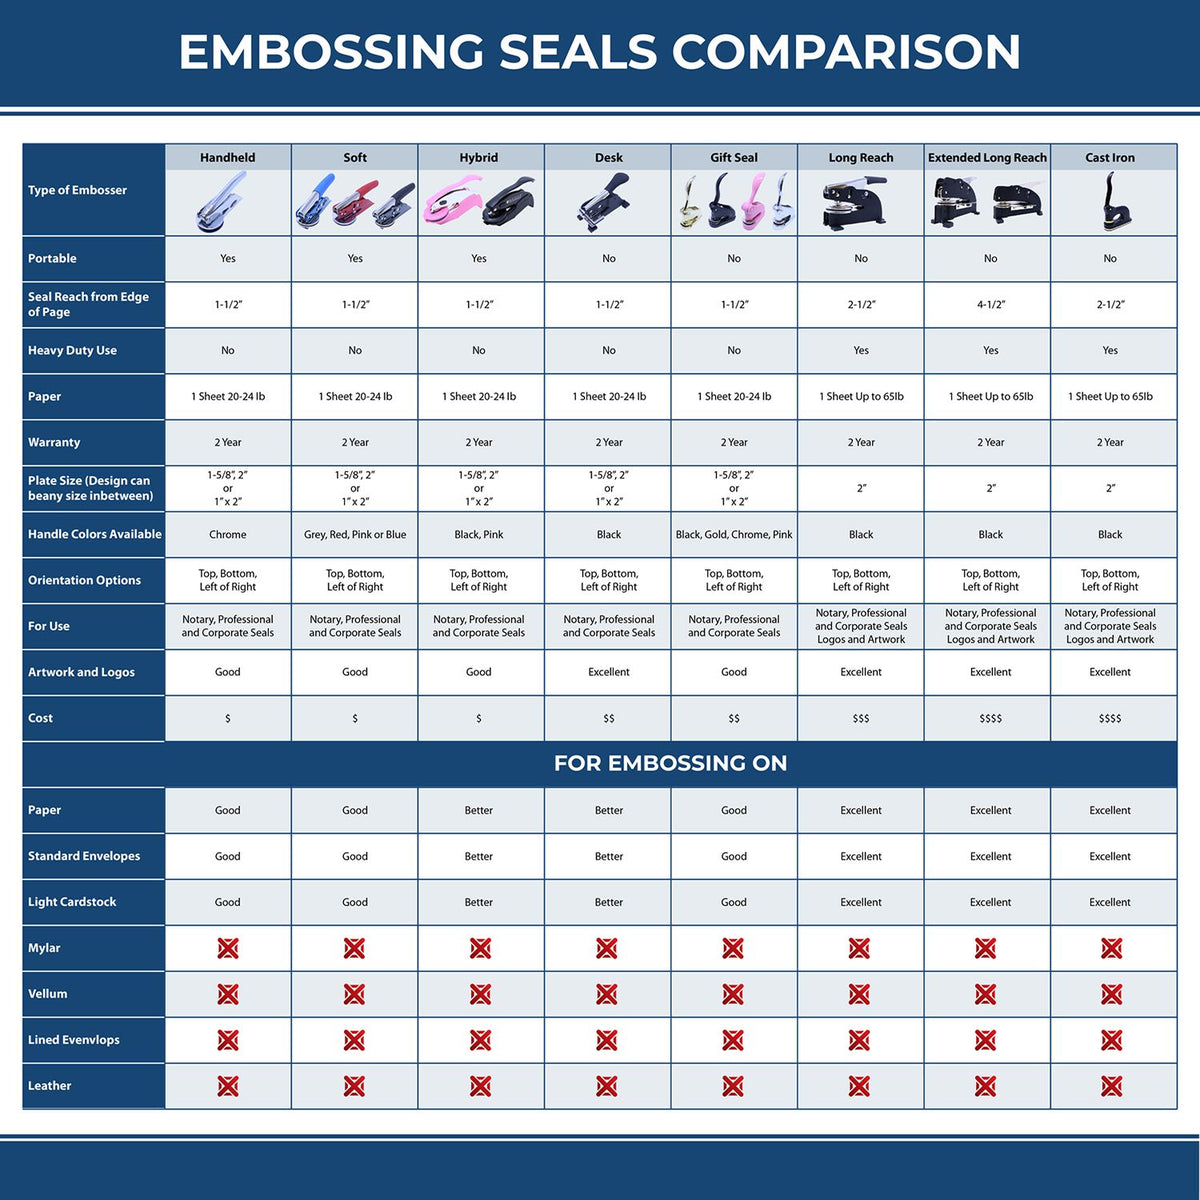 A comparison chart for the different types of mount models available for the Soft Texas Professional Engineer Seal.